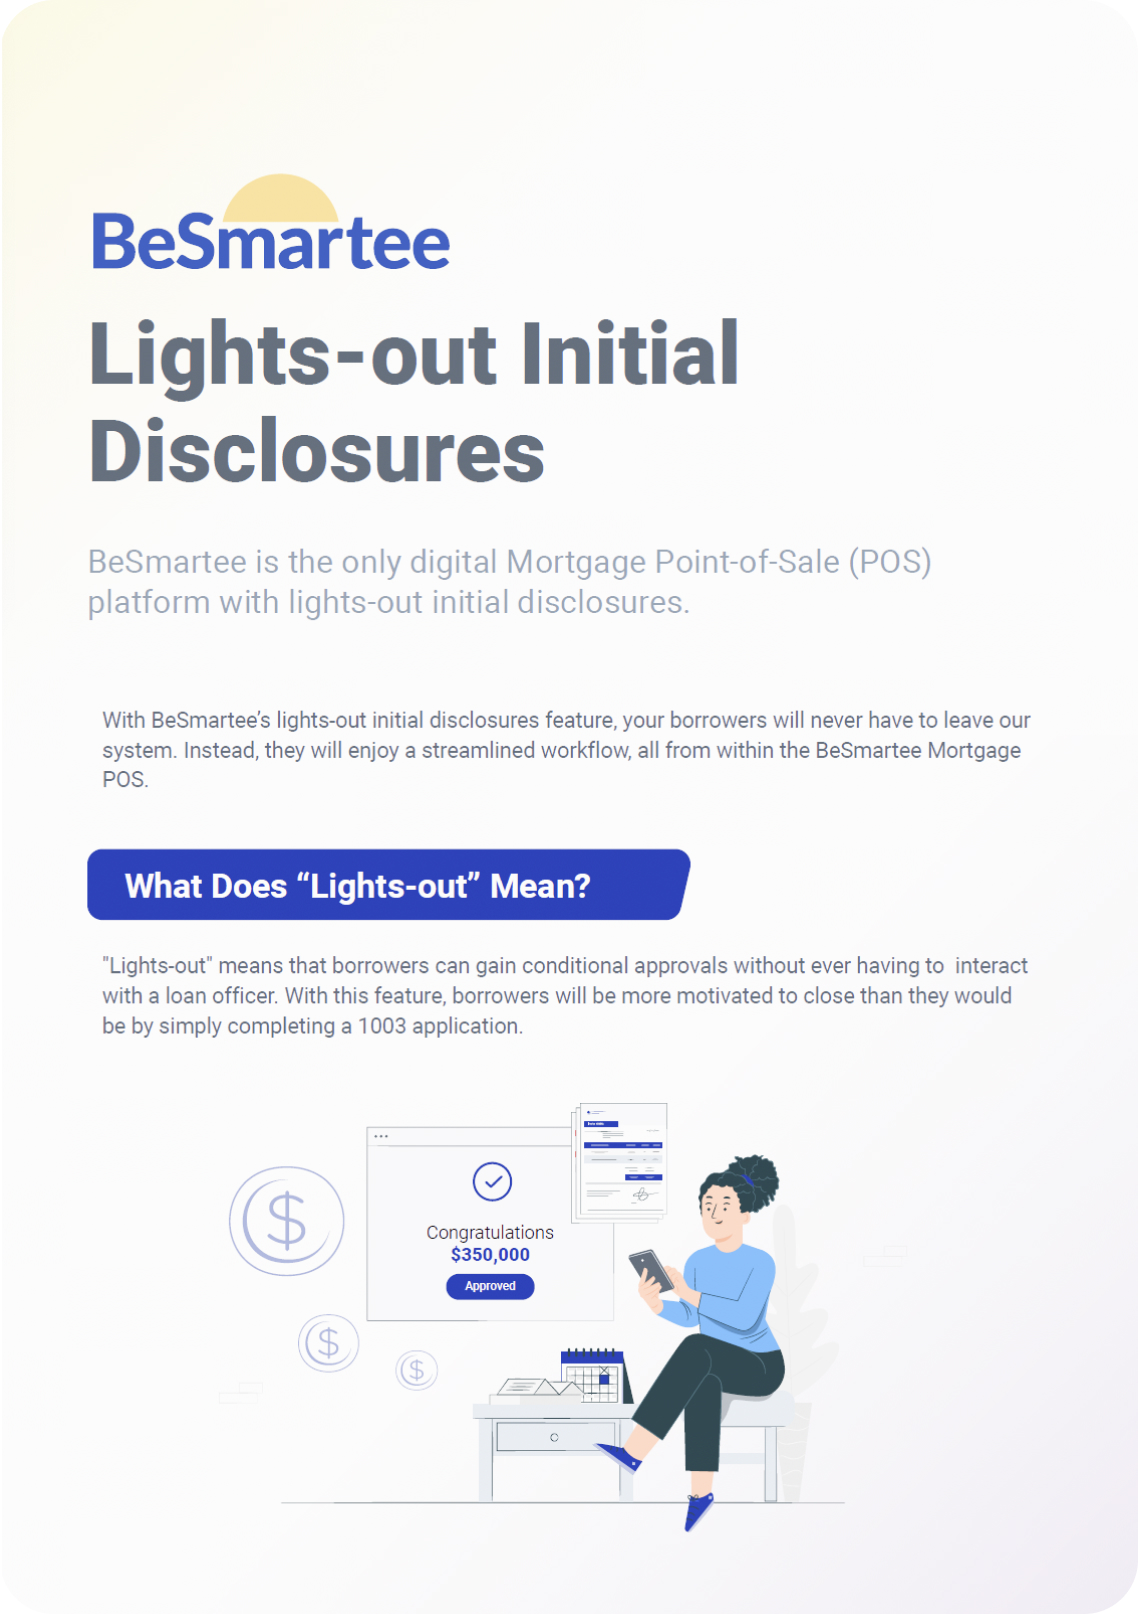 Lights-out Initial Disclosures